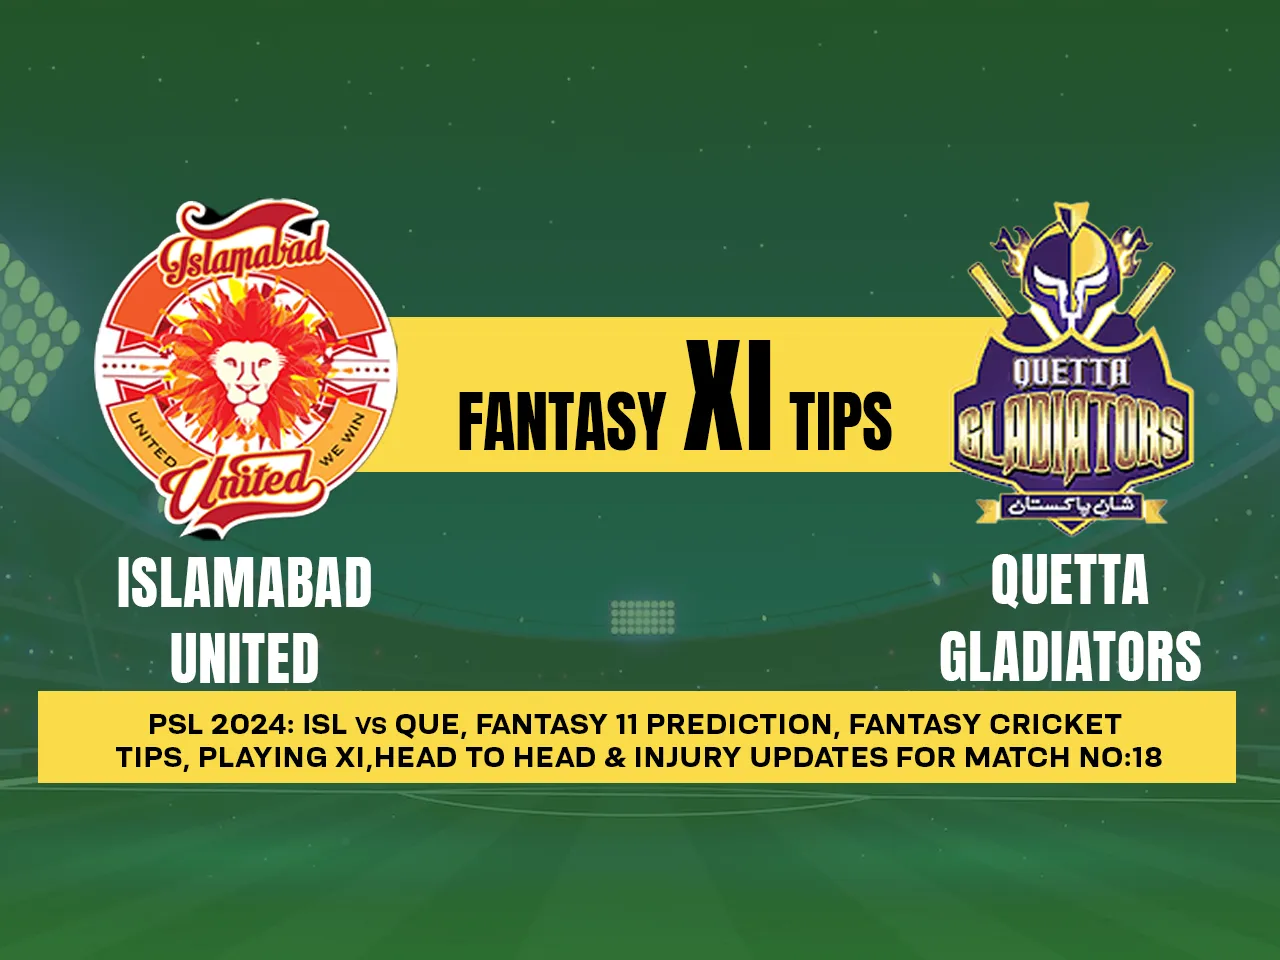 PSL 2024: ISL vs QUE Dream11 Prediction, Playing XI, Head-to-Head stats, and Pitch report for Match 18